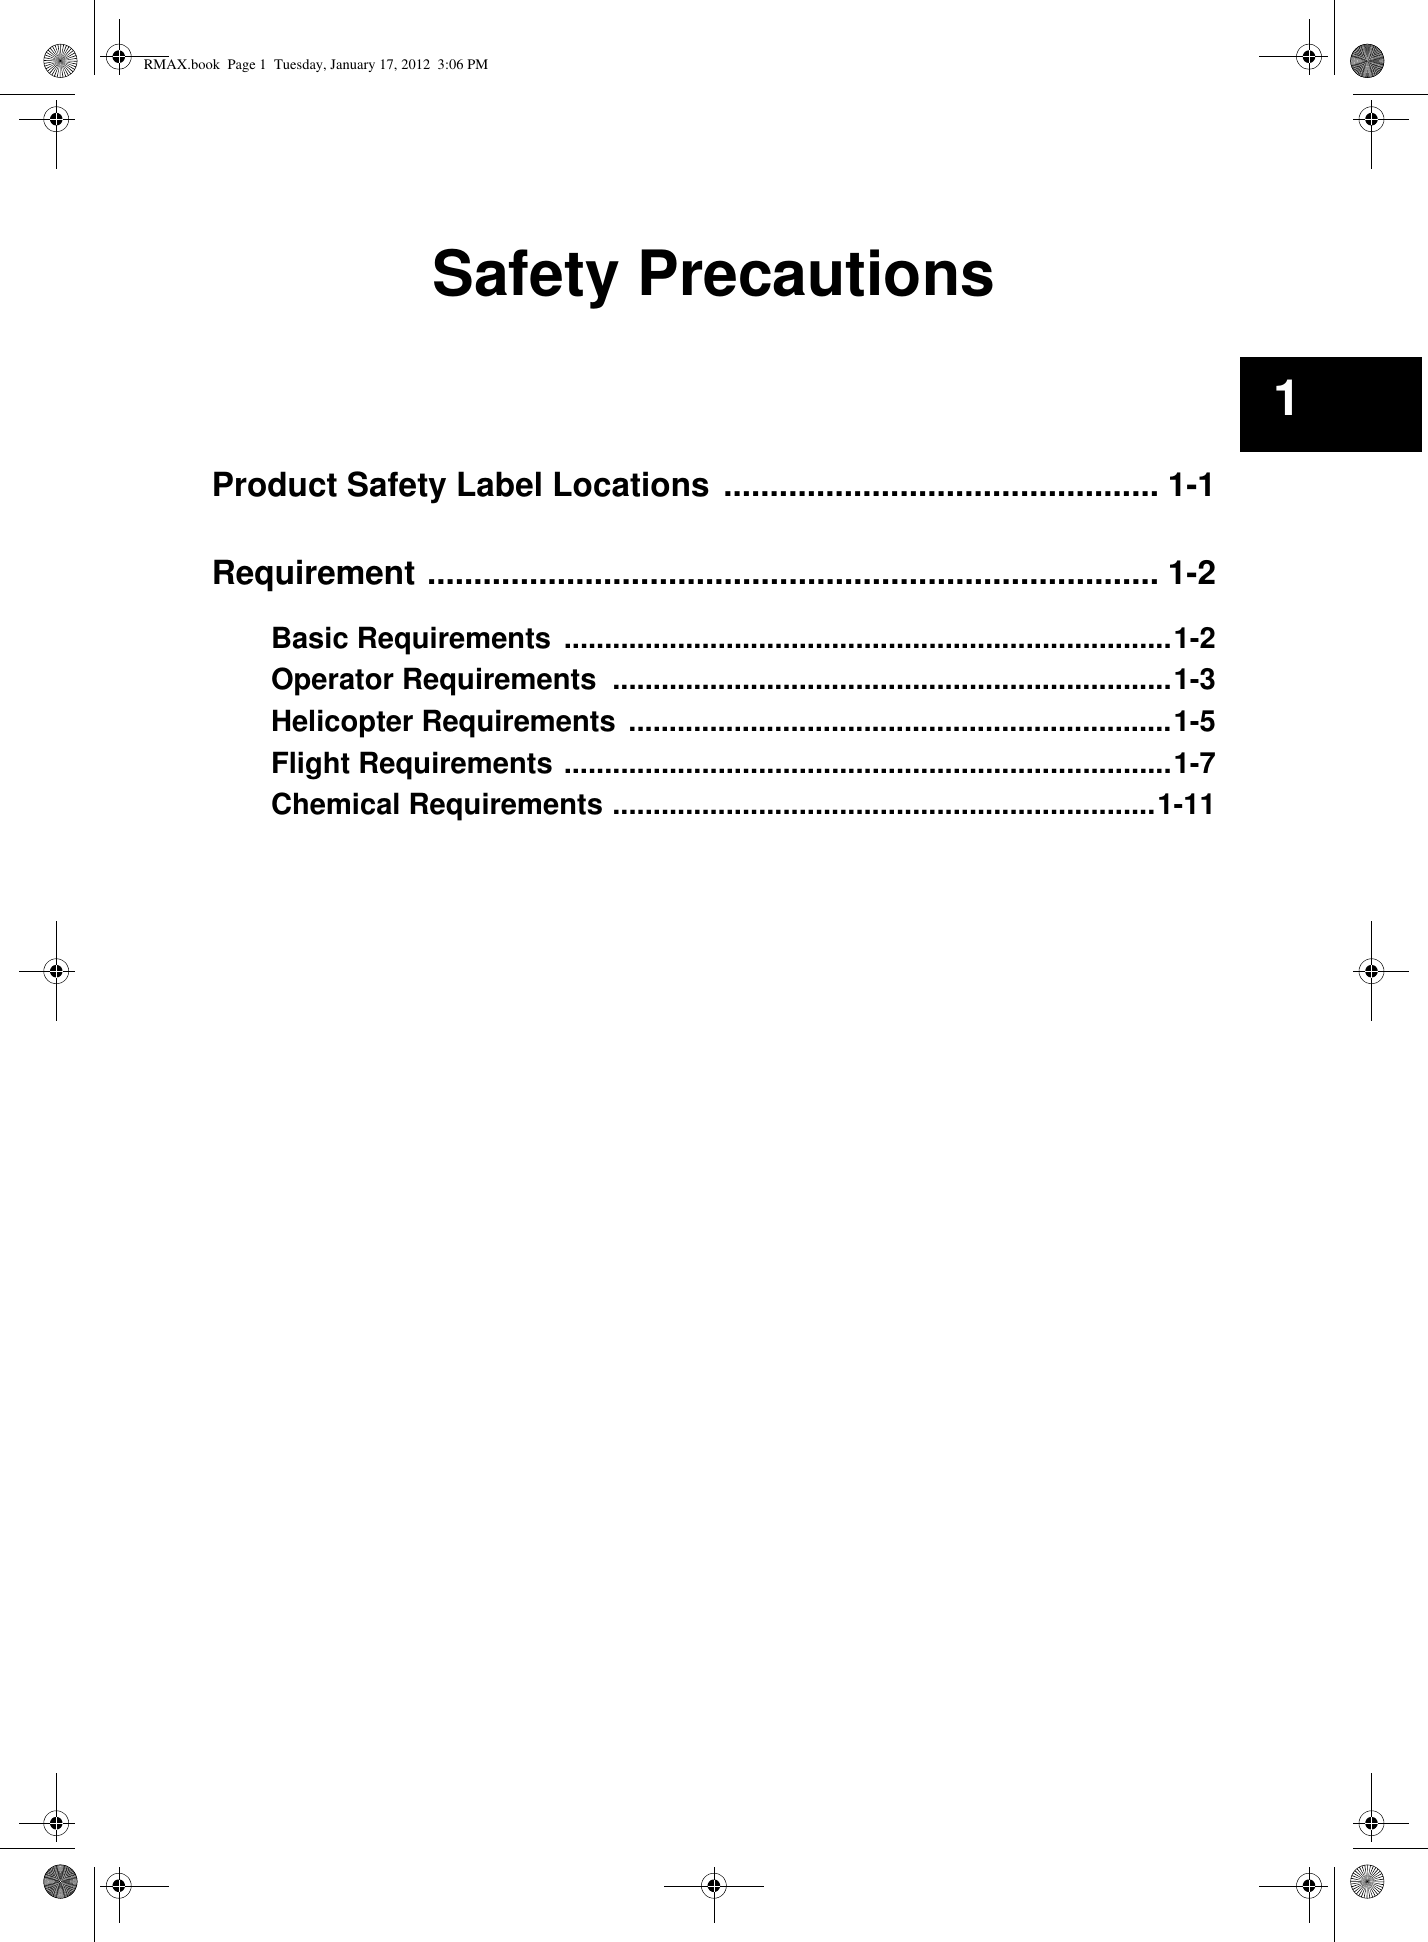 Safety PrecautionsProduct Safety Label Locations ............................................... 1-1Requirement ............................................................................... 1-2Basic Requirements ...........................................................................1-2Operator Requirements  .....................................................................1-3Helicopter Requirements ...................................................................1-5Flight Requirements ...........................................................................1-7Chemical Requirements ...................................................................1-111RMAX.book  Page 1  Tuesday, January 17, 2012  3:06 PM